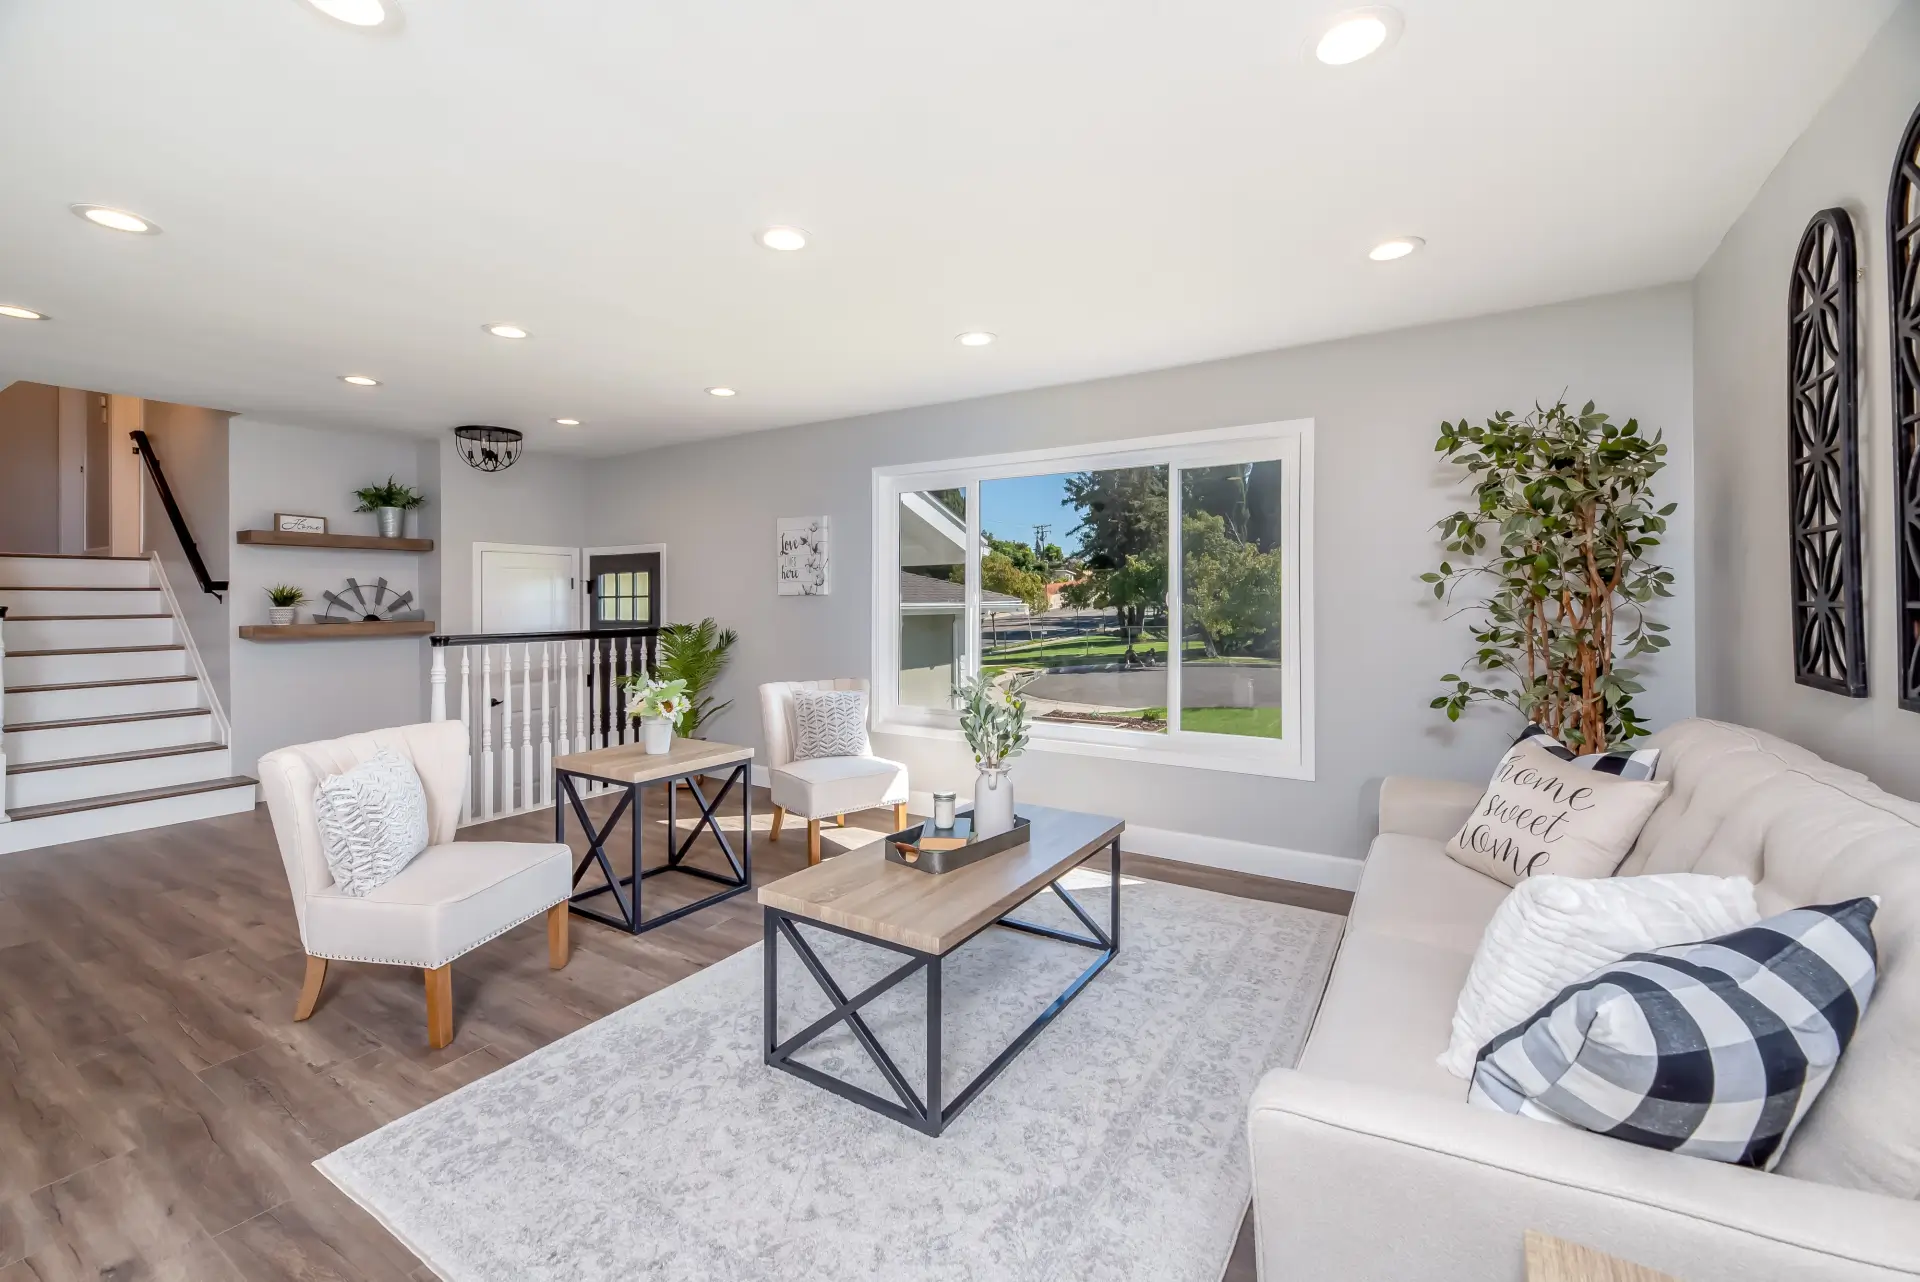 The Art of Home Staging: Preparing Your Home for Open Houses and Showings